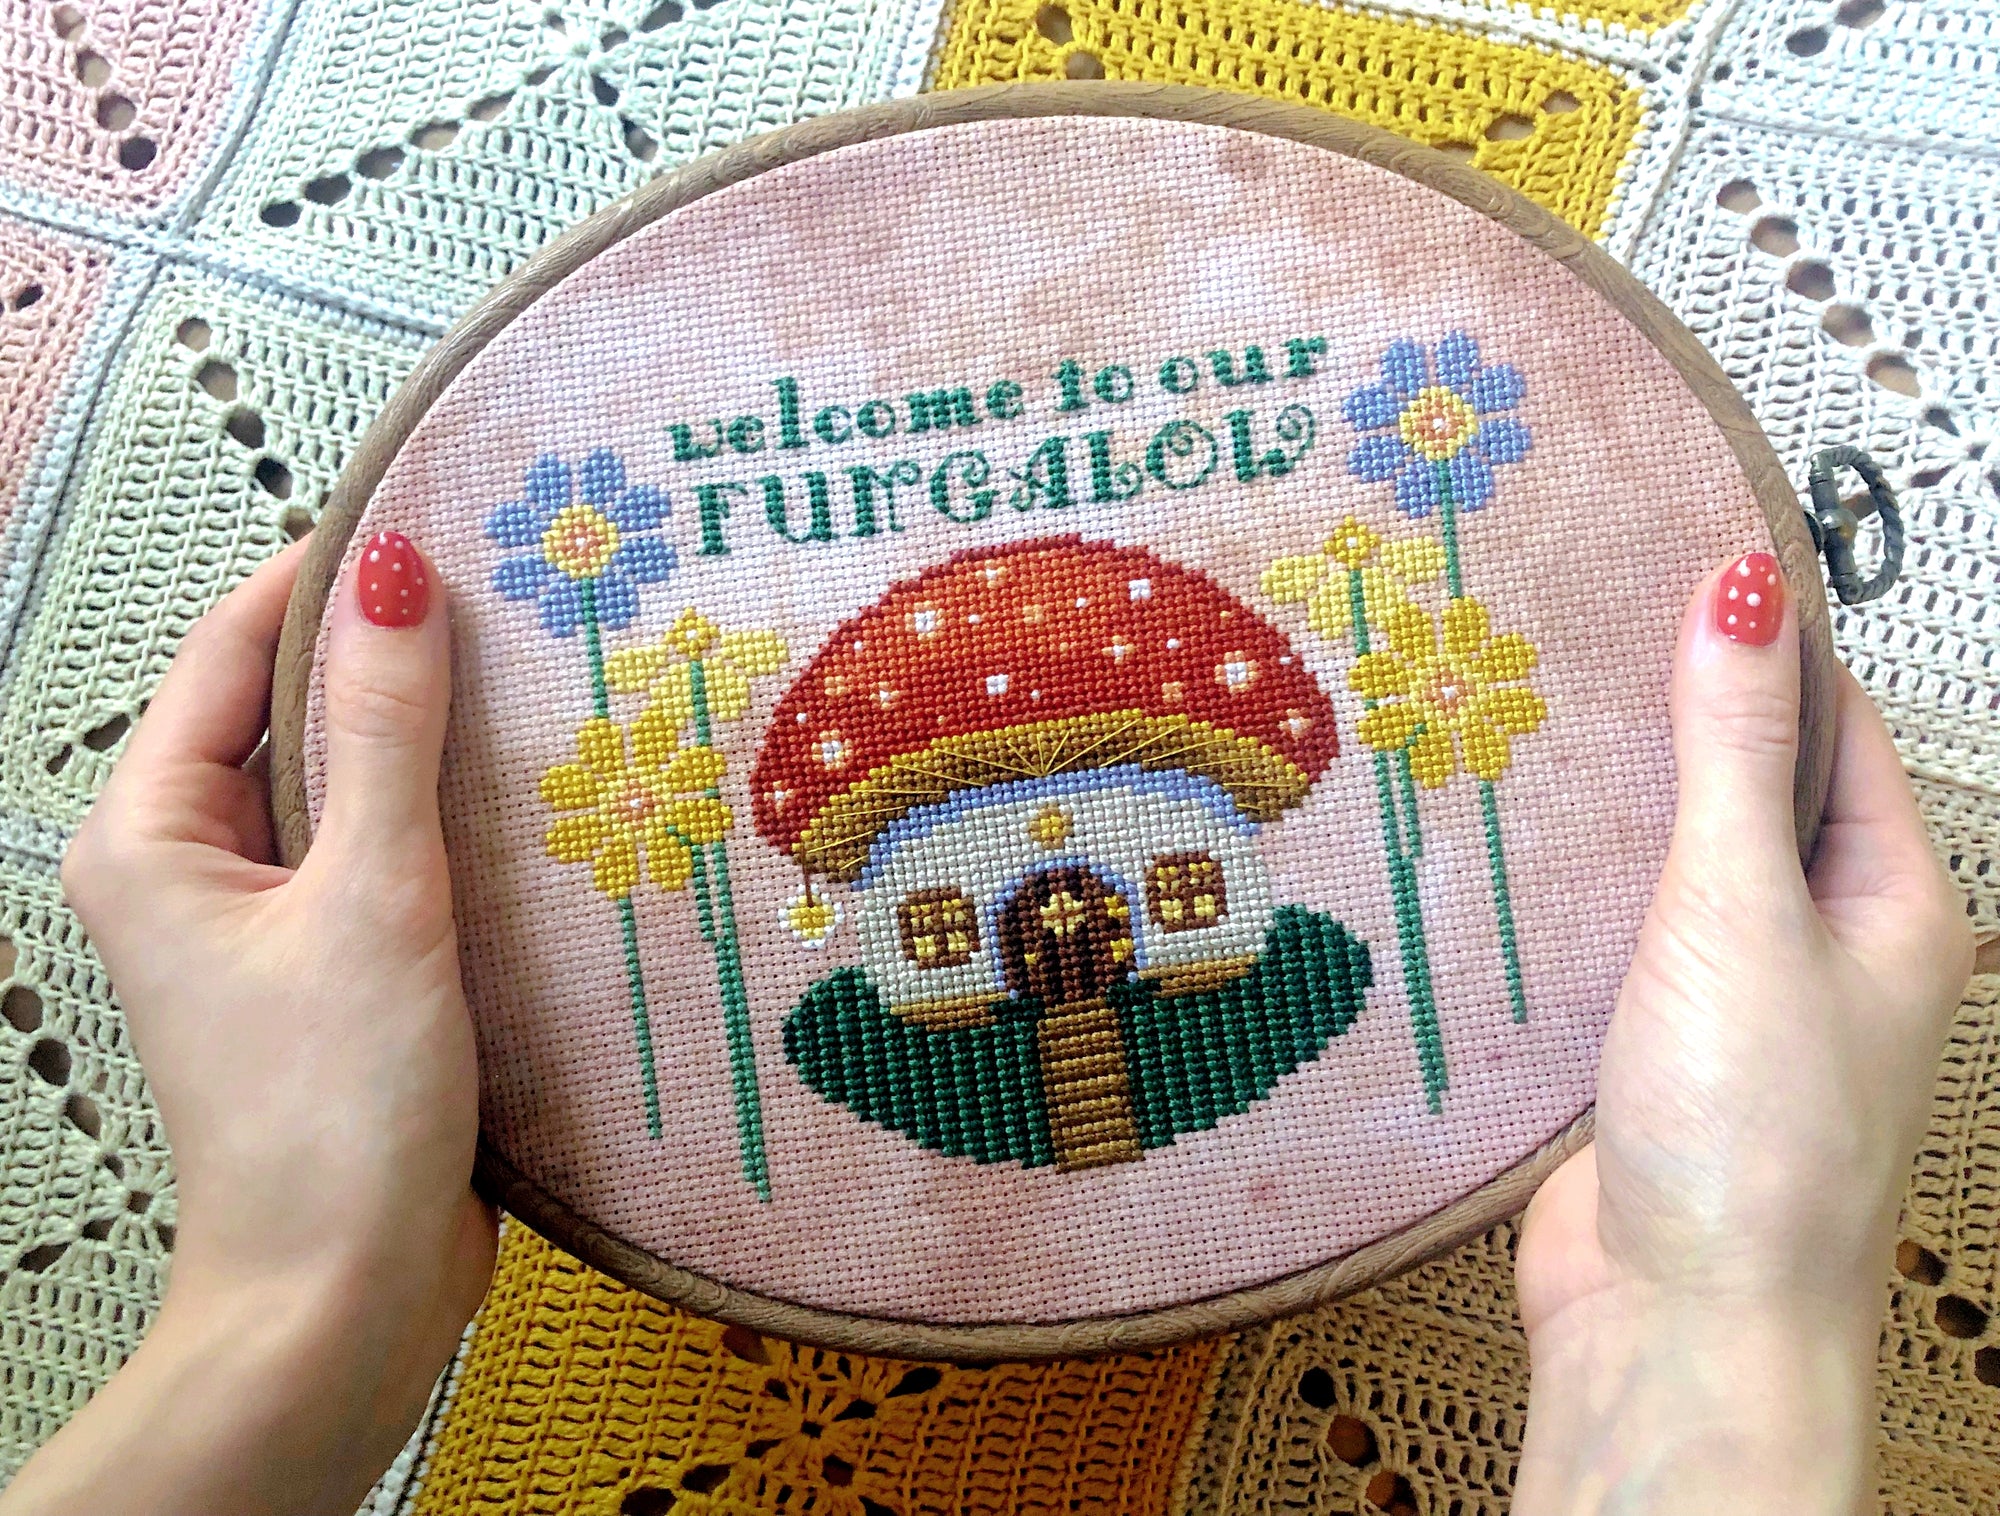 Embroidery hoop held in hand, to show scale. Pattern is of medium size. Backstitches in the toadstool top are clearly visible here. Quote also contains backstitches and fractional stitches. Behind the scene is a crochet blanket in light colors.